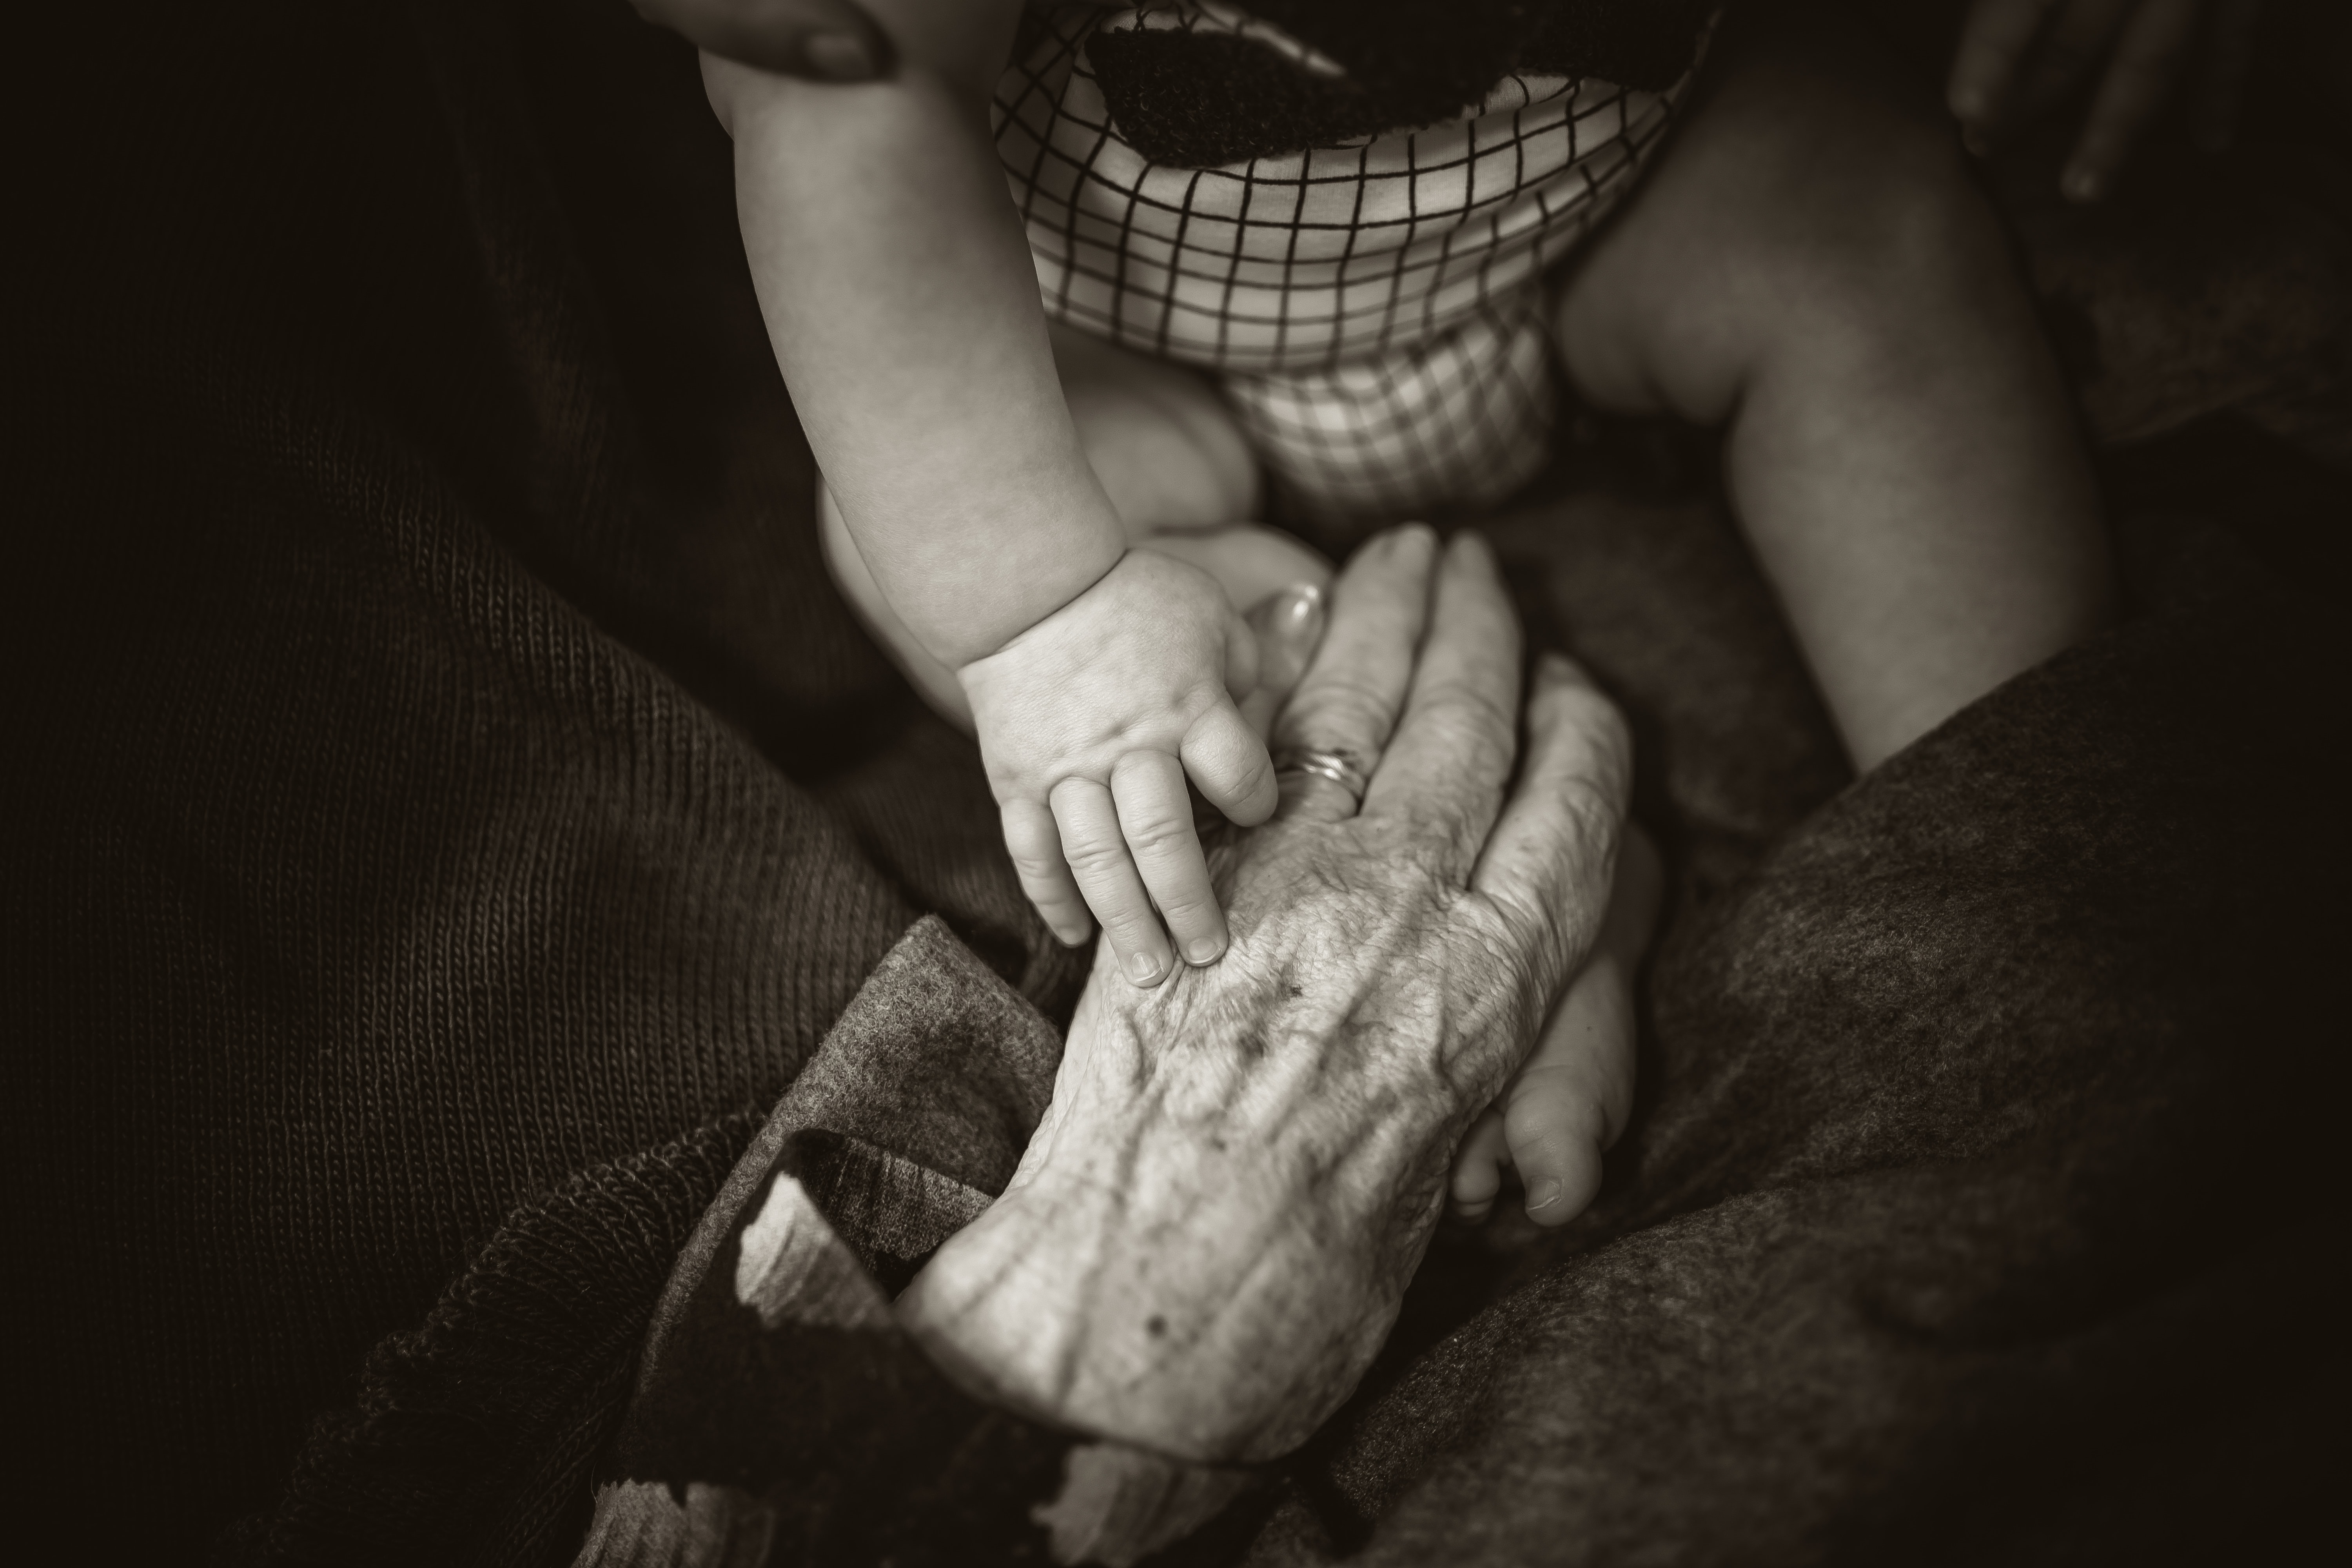 A close up black and white photograph showing young child holding hands with an elderly person